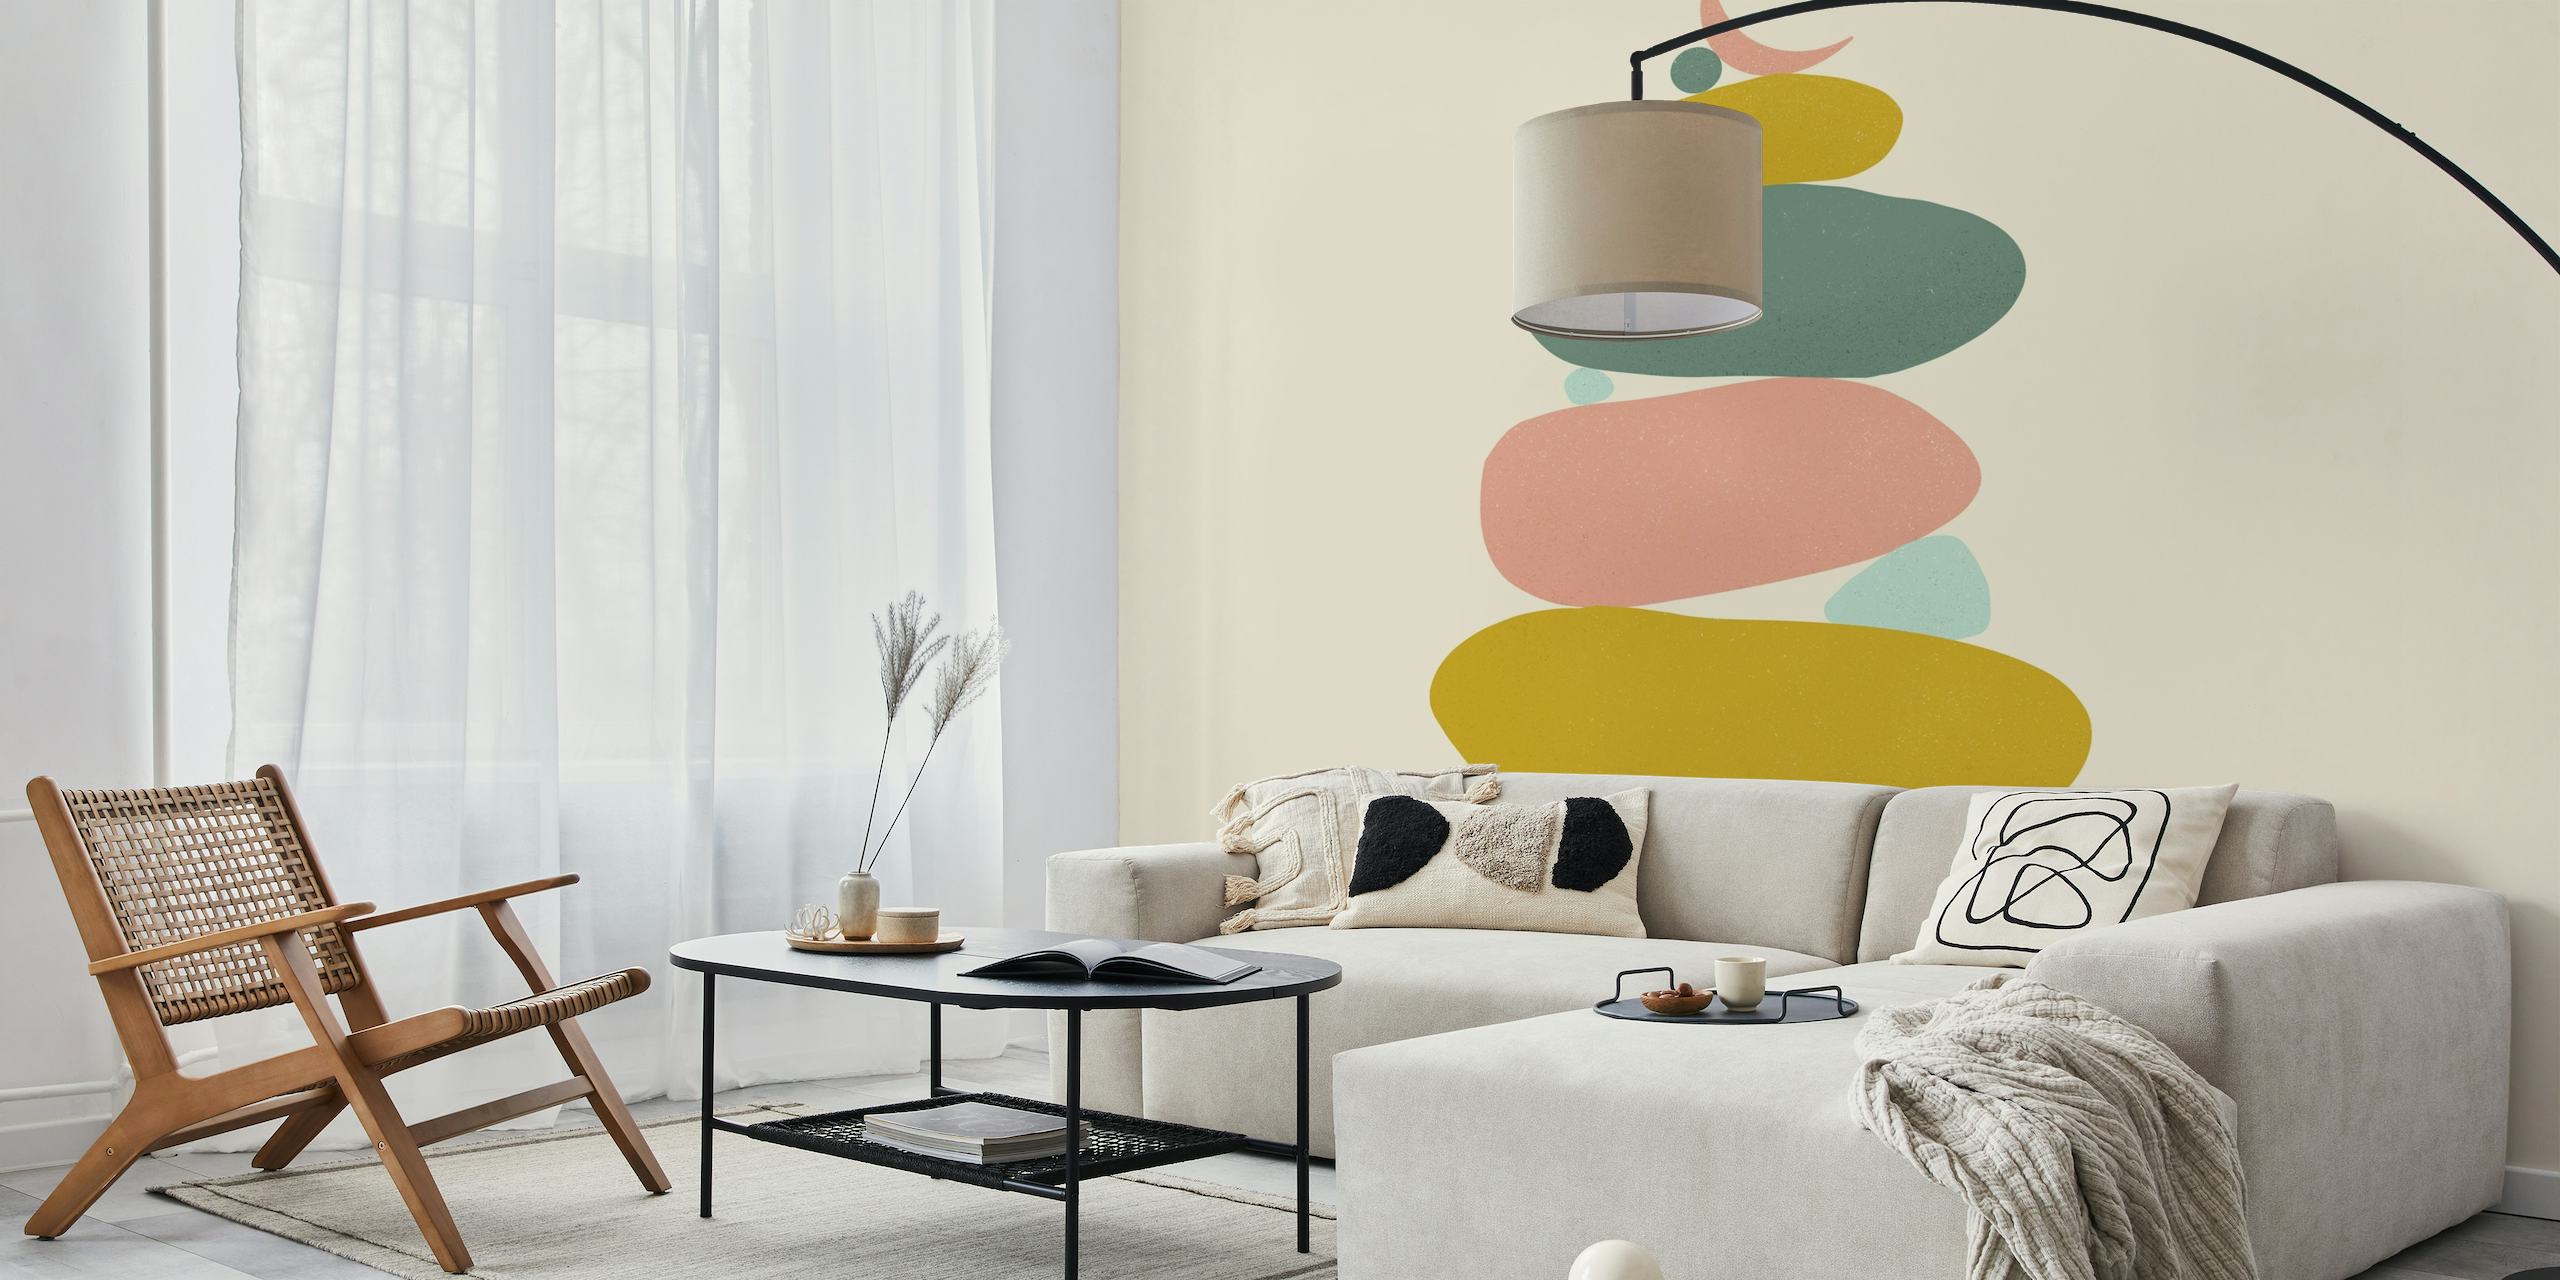 Illustrative wall mural of stacked stones in pastel colors, conveying a sense of calm and balance.